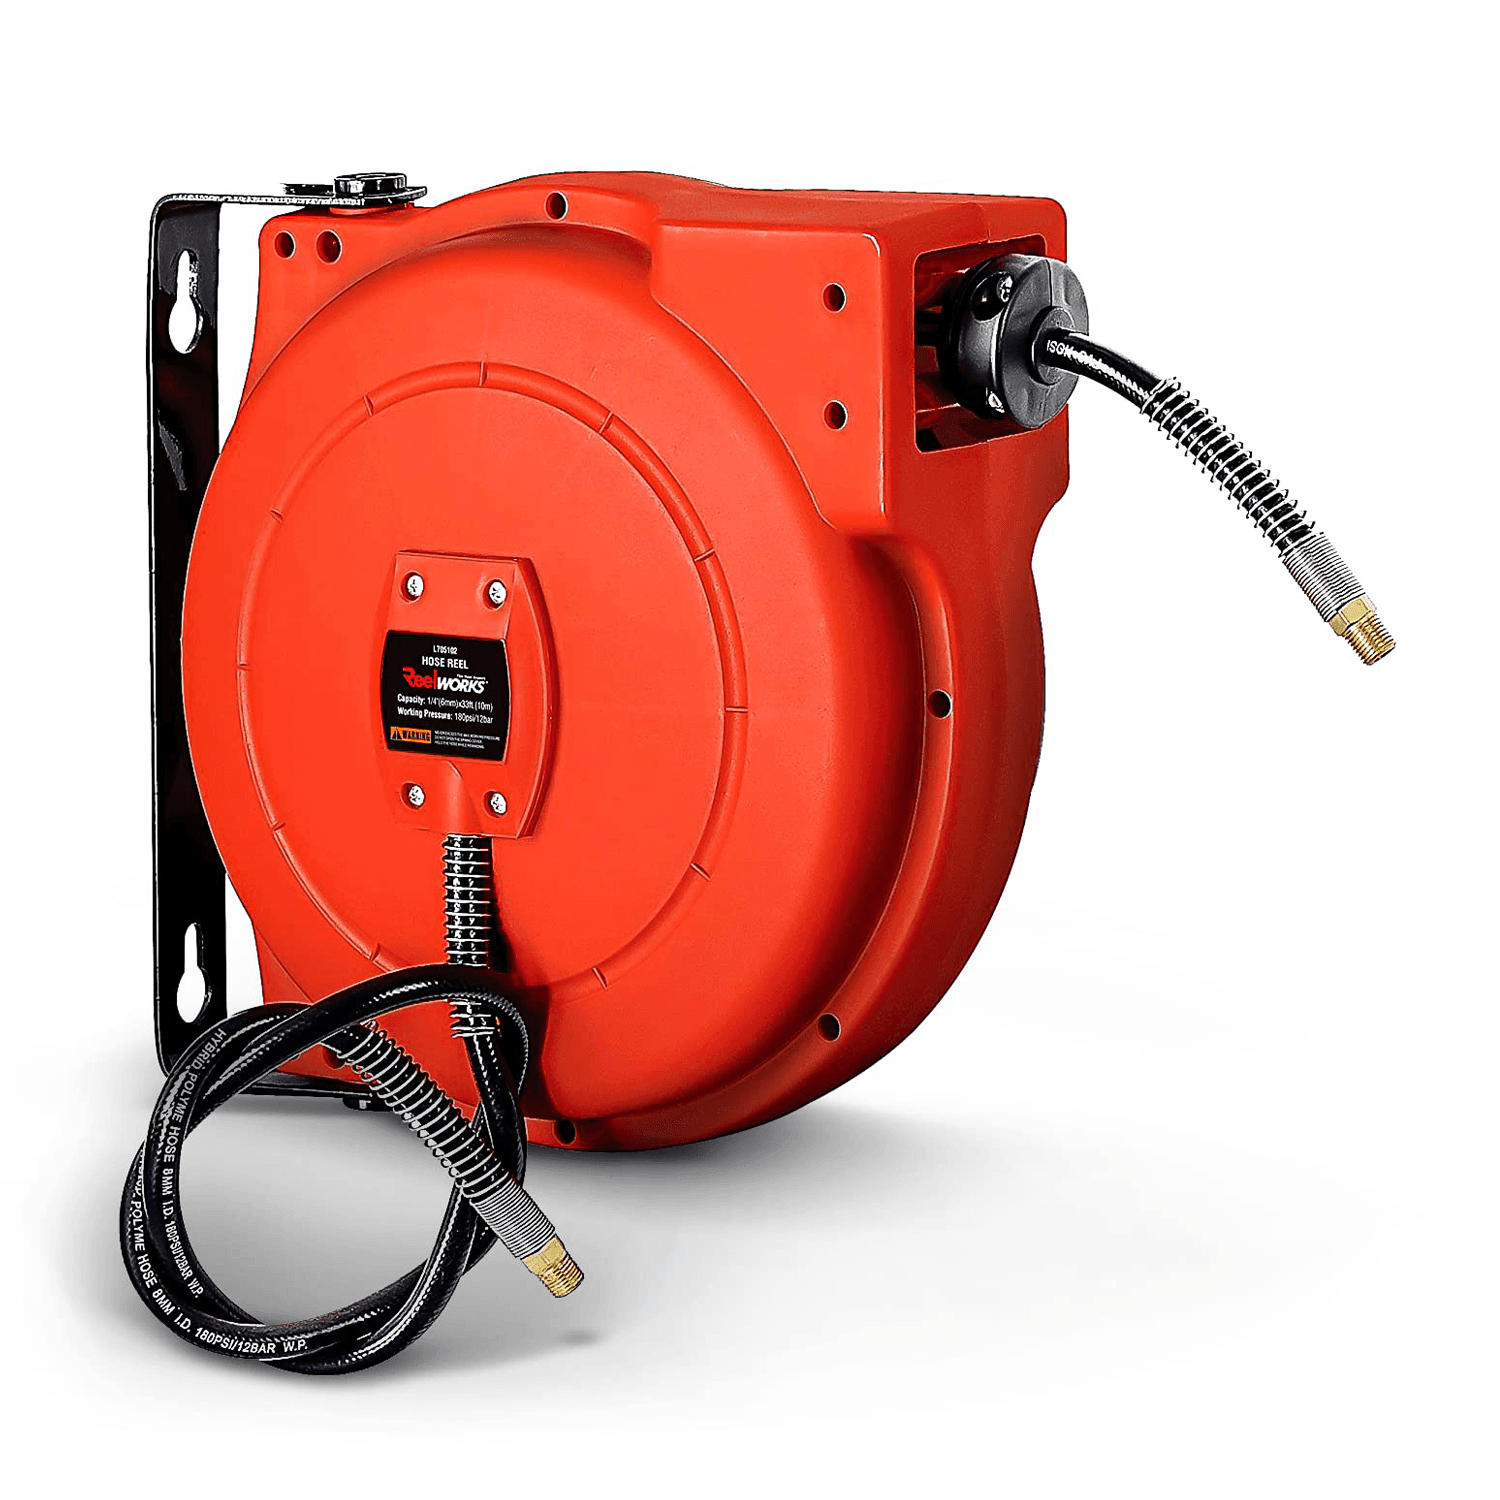 ReelWorks Mountable Retractable Air Hose Reel - 1/4 x 33'FT, 3' Ft Le